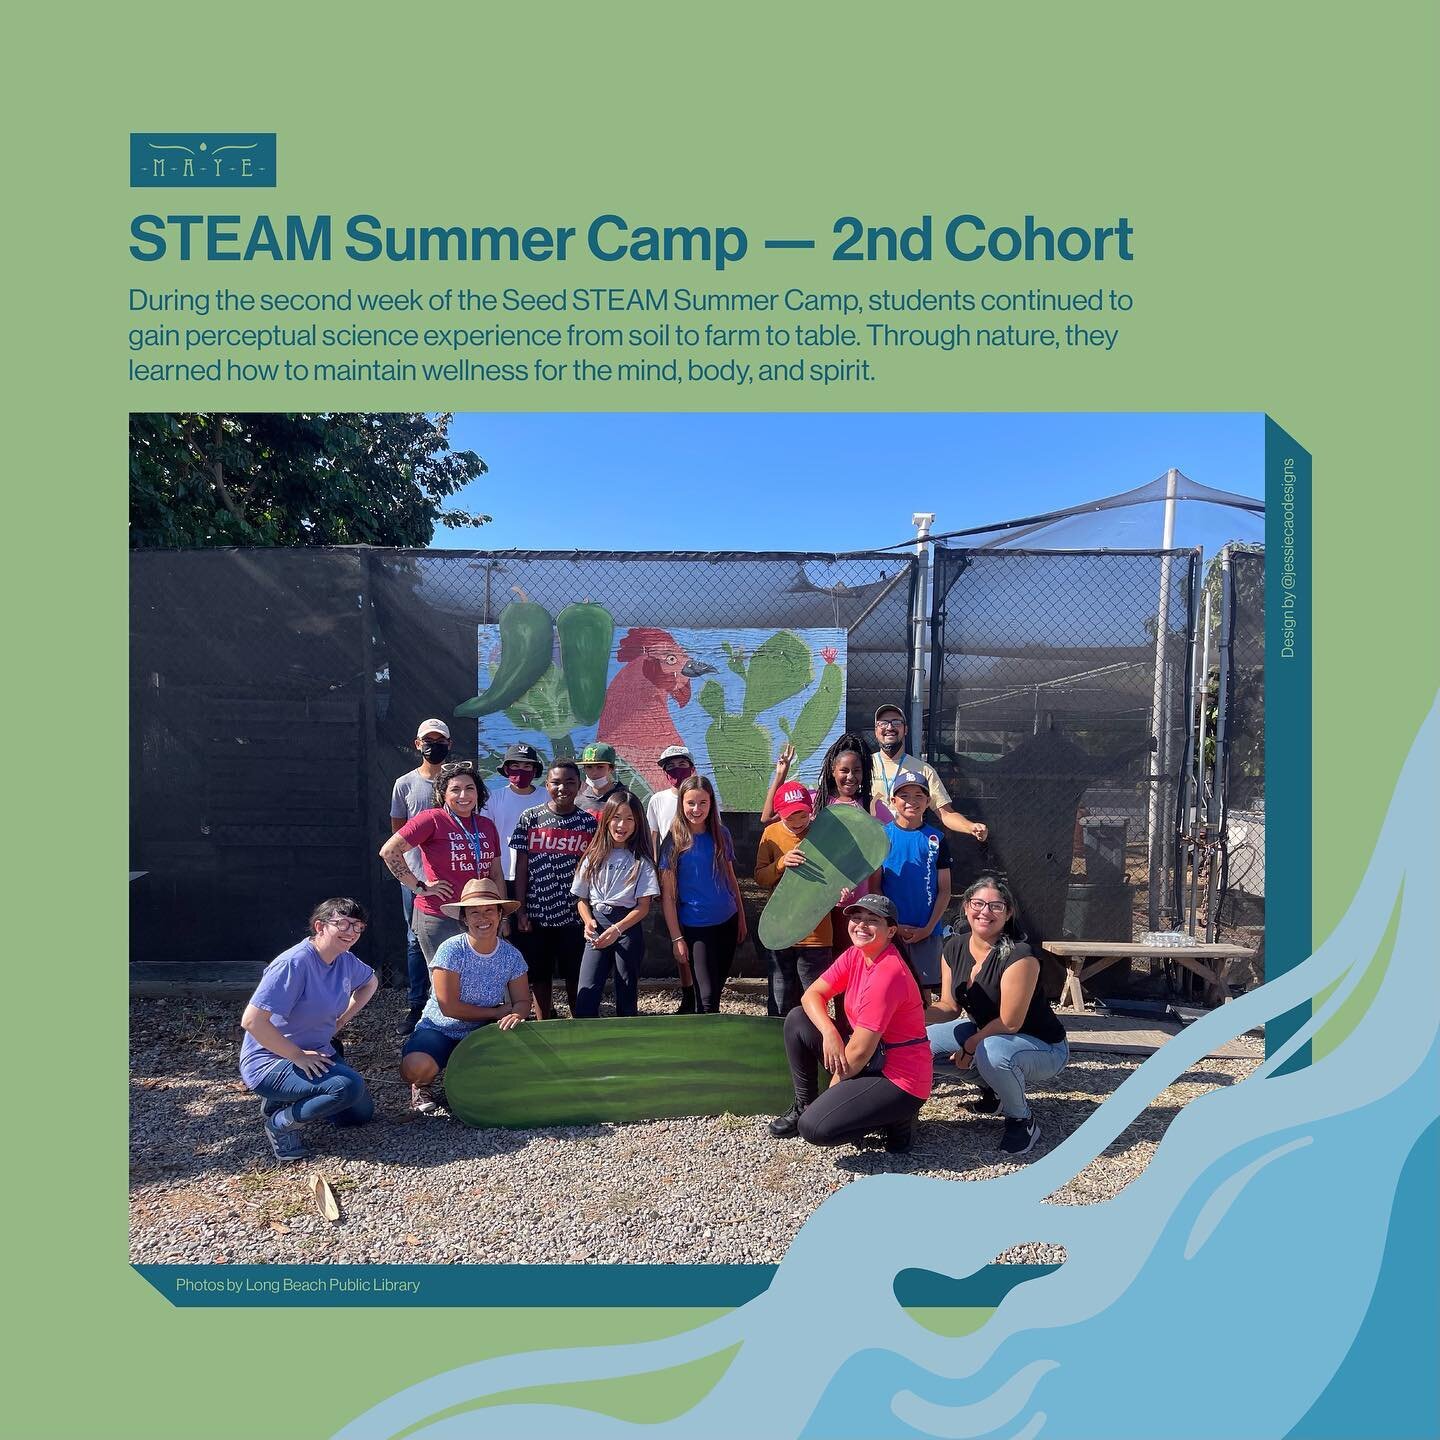 🌈 Take a look at our recap for the second week of the Seed STEAM Summer Camp, which has since concluded.

🌳 Students gained perceptual science experience from soil to farm to table. Through nature, they learned how to maintain wellness for the mind